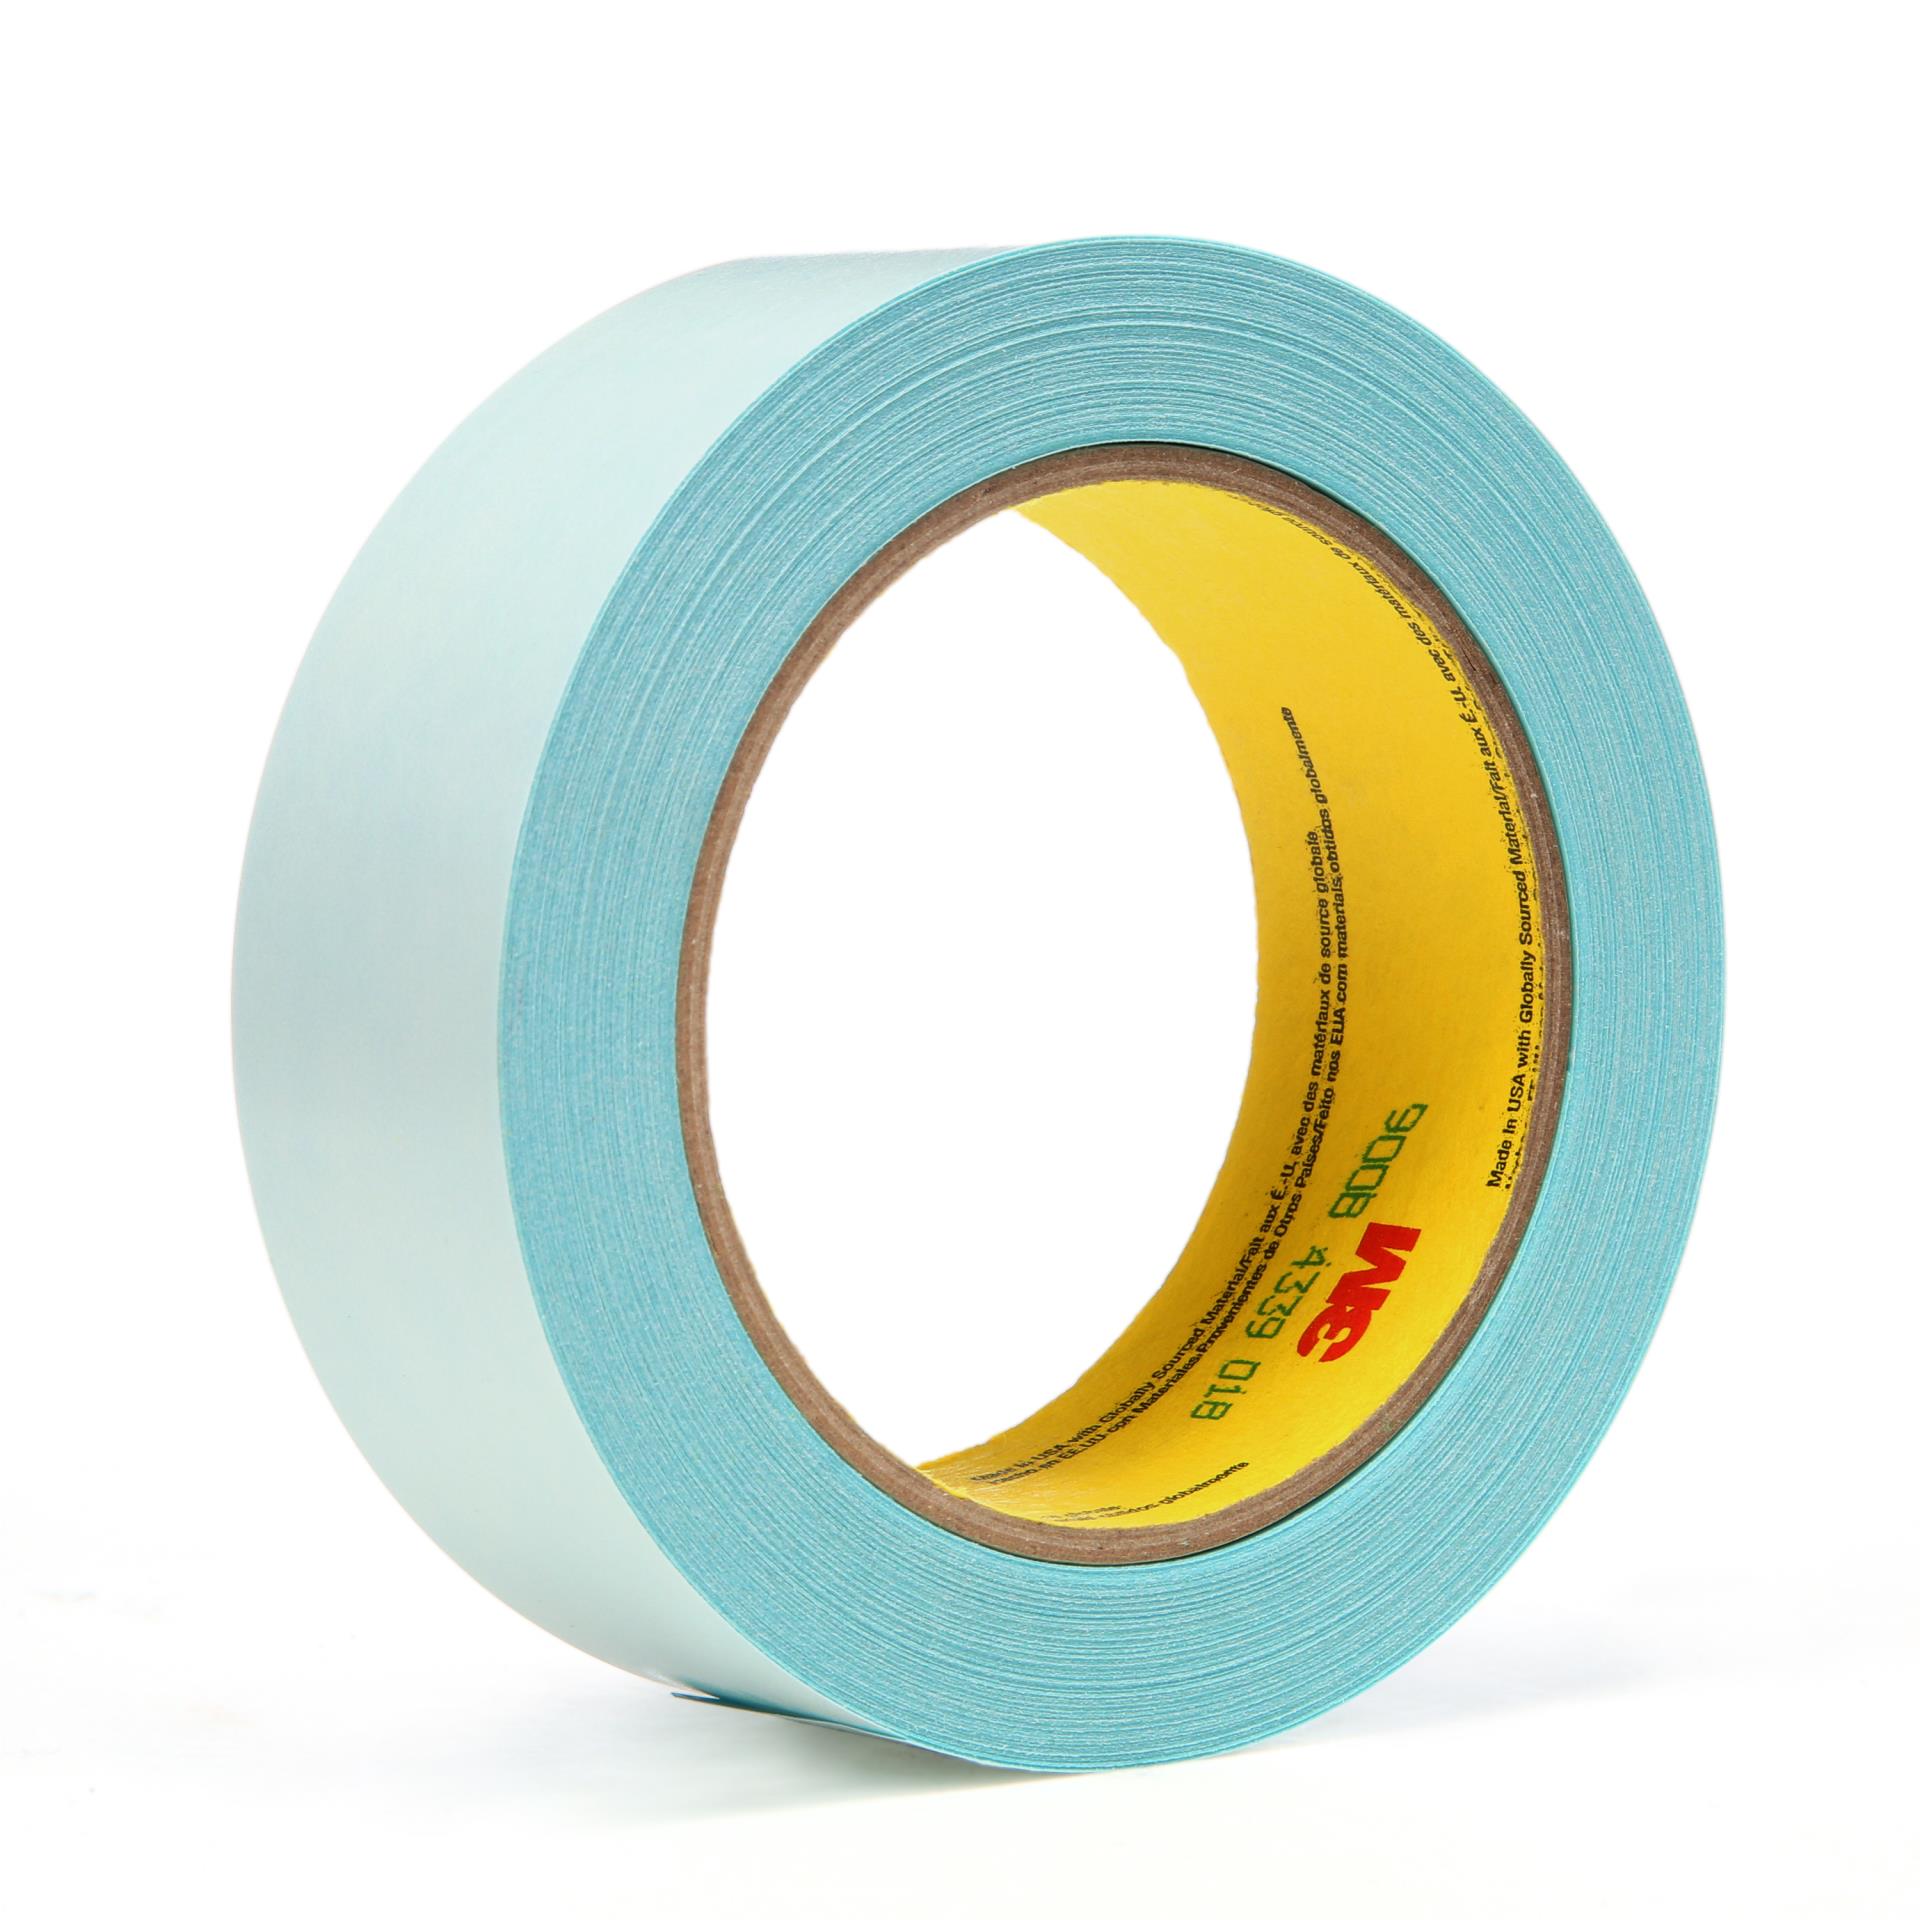 00051131176645 3M™ Repulpable Double Coated Splicing Tape 900B, Blue, 36  mm x 33 m, 2.5 mil, 24 rolls per case Aircraft products tapes 6300341